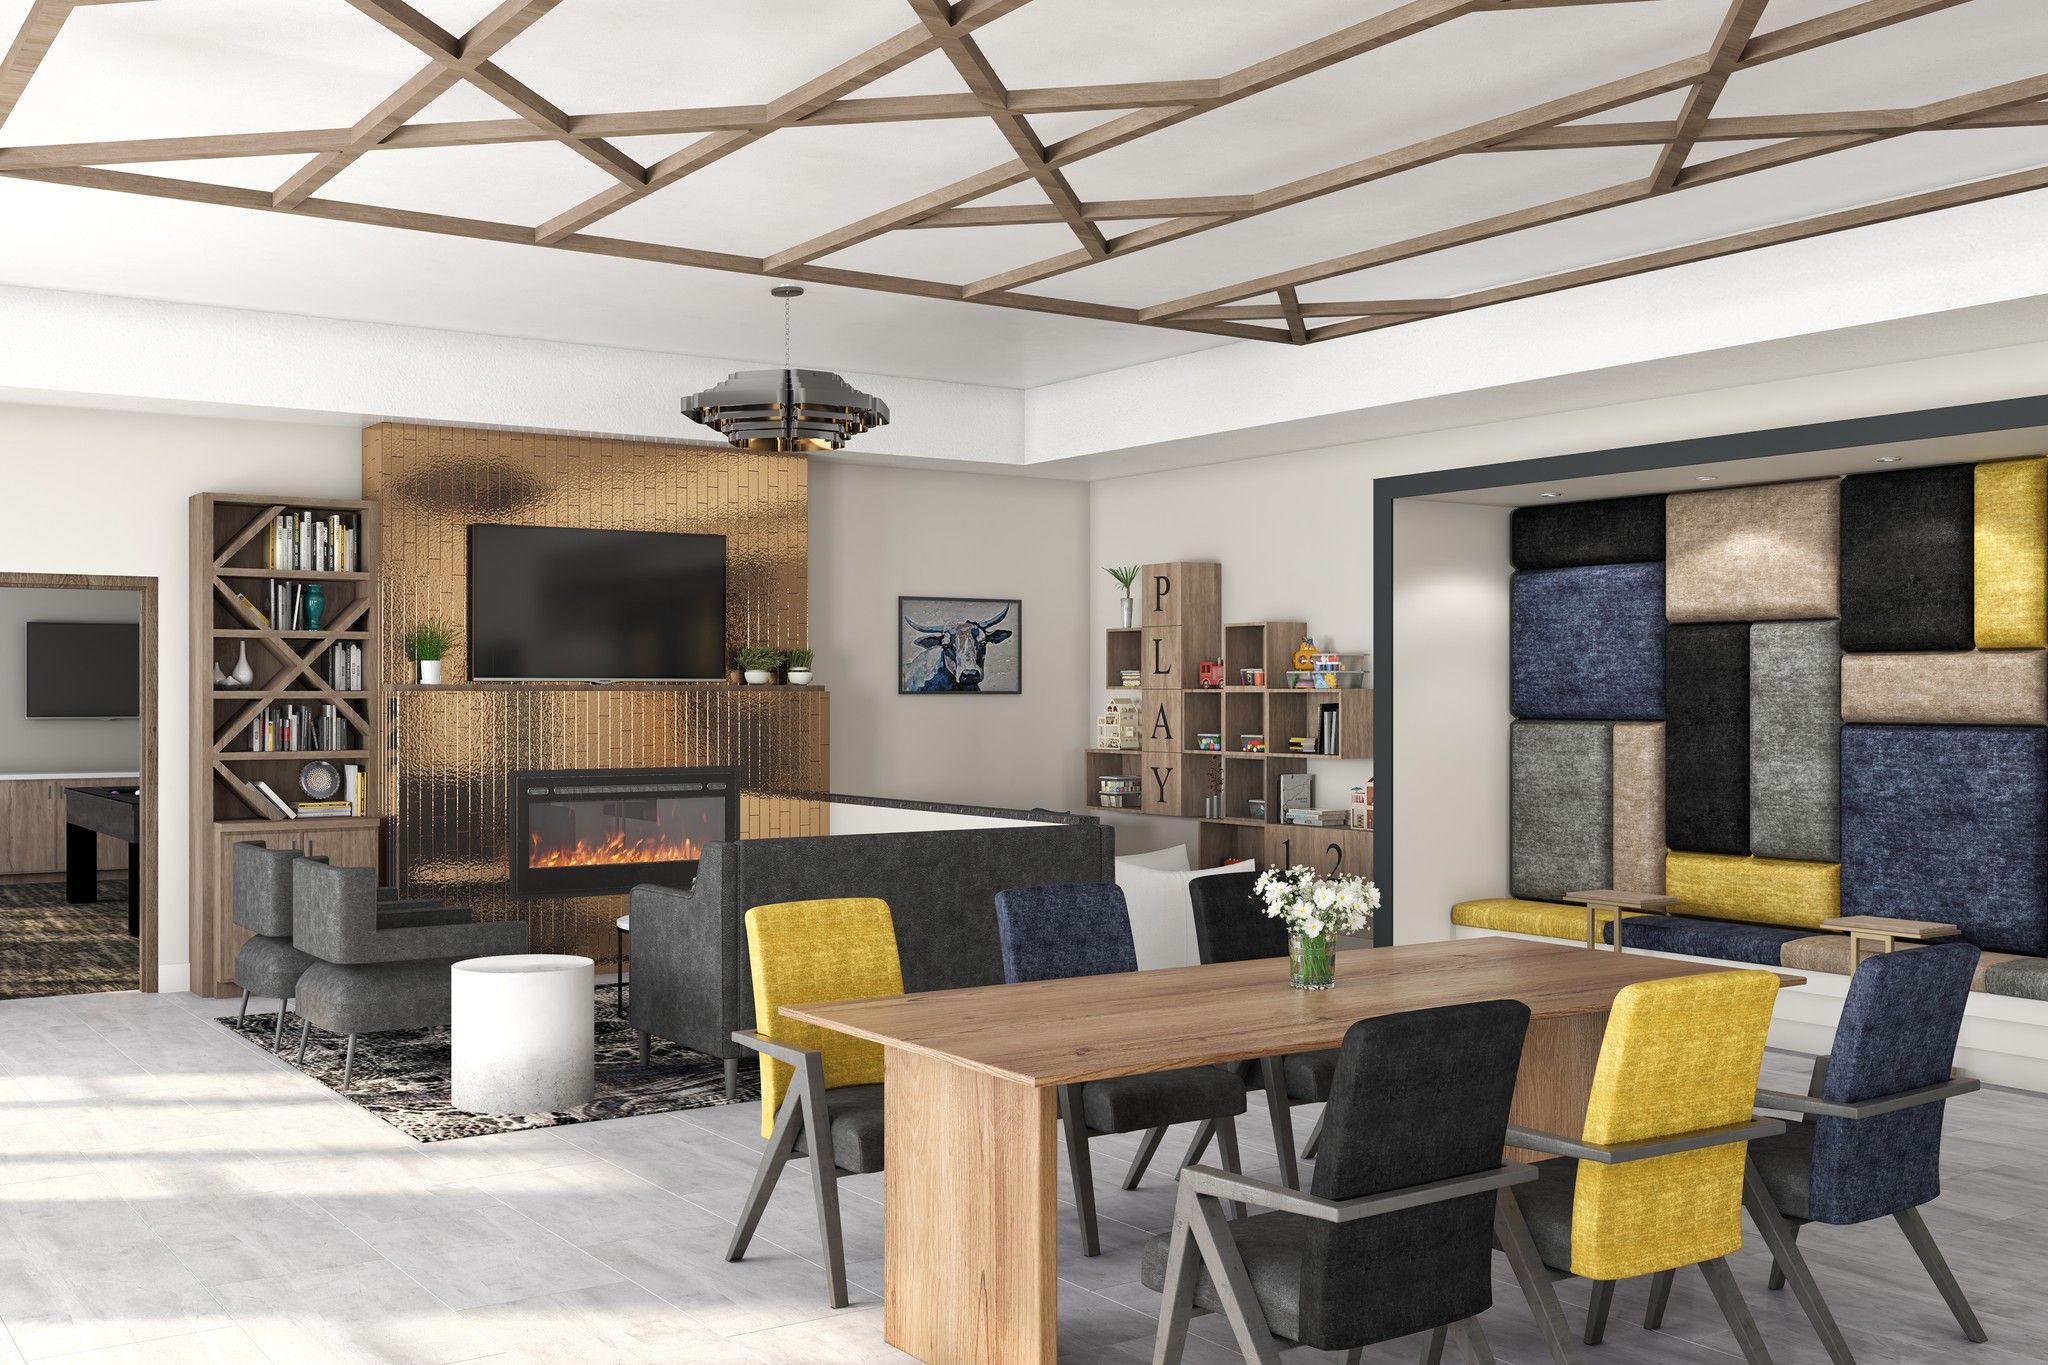 Rendering of The Lounge amenity at Slate Apartments with room for entertainment